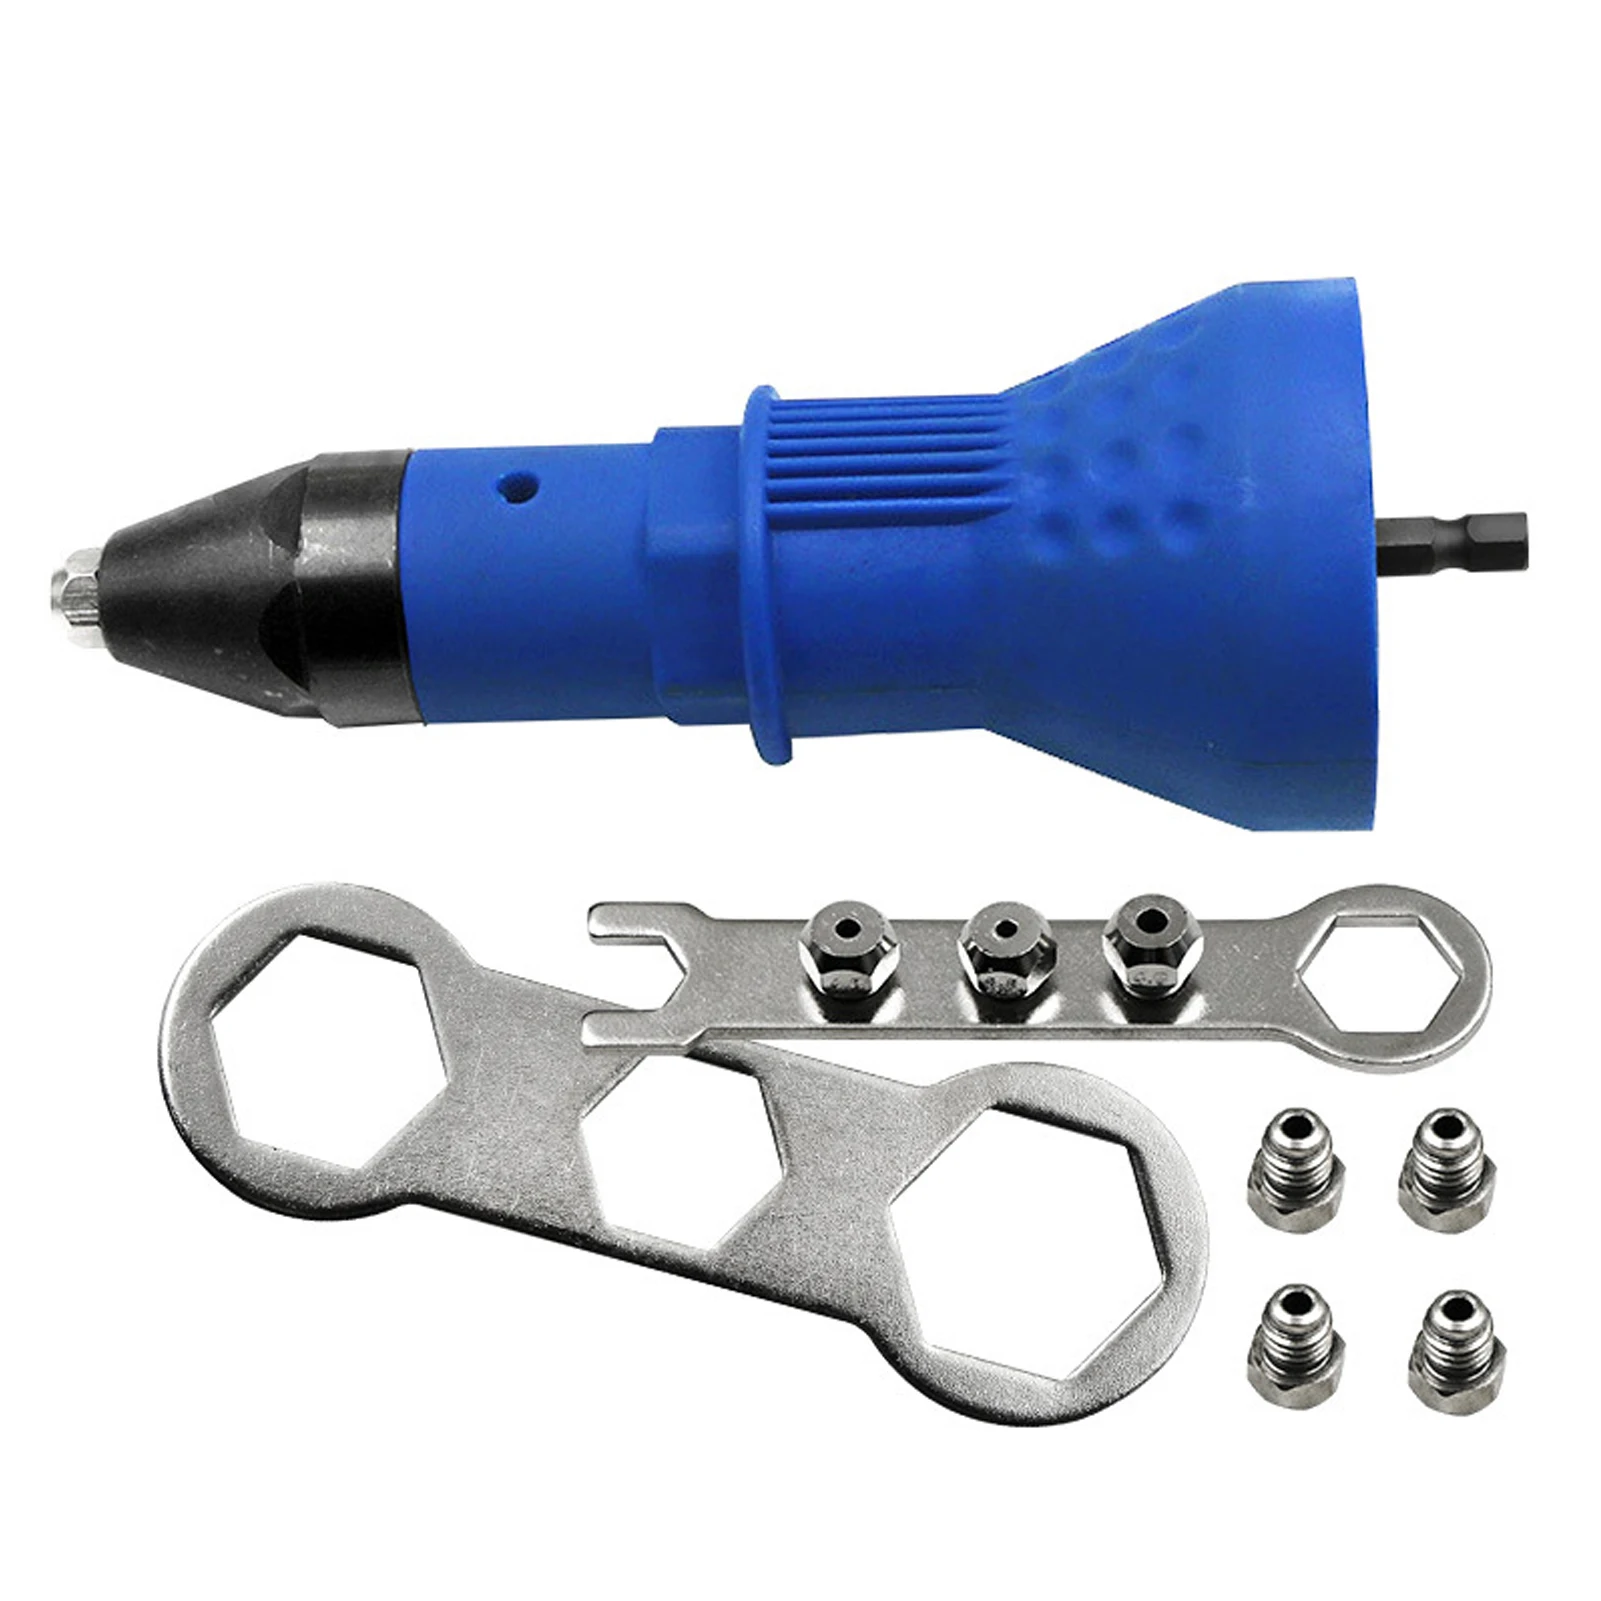 

Electric Tool Nut Plastic Carbon Steel Blind For Cordless With Wrench Professional Attachment Rivet Drill Adapter Screwdrivers